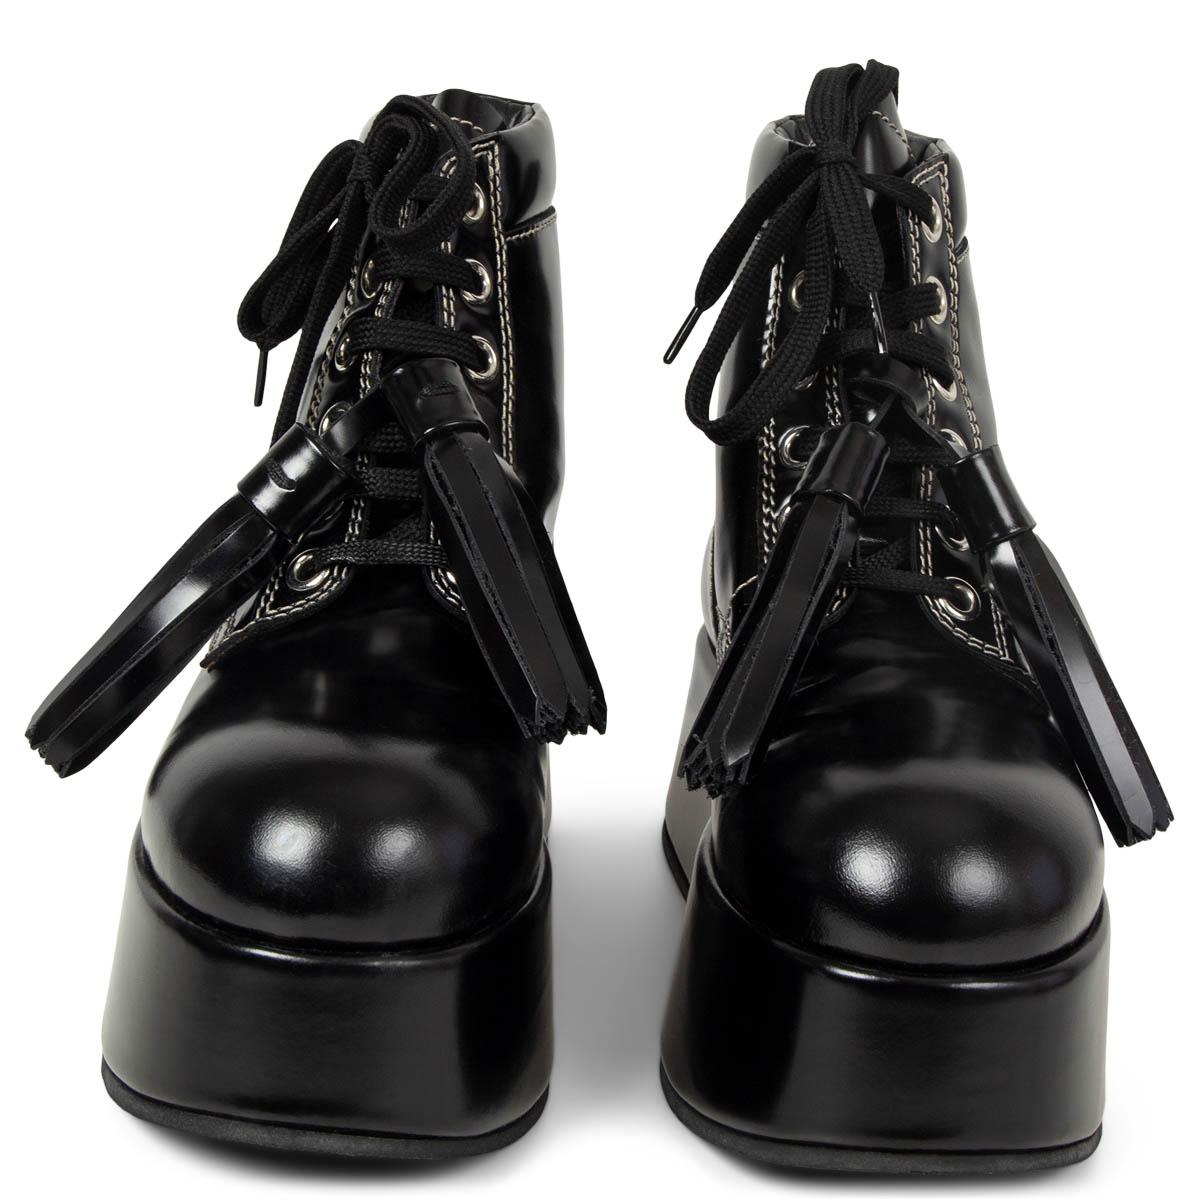 100% authentic Marni lace-up platform ankle boots in black patent leather embellished with tassels, contrasting white stitching and a pull tab at the heel. Have been worn and are in excellent condition. Come with dust bag.

Fall/Winter